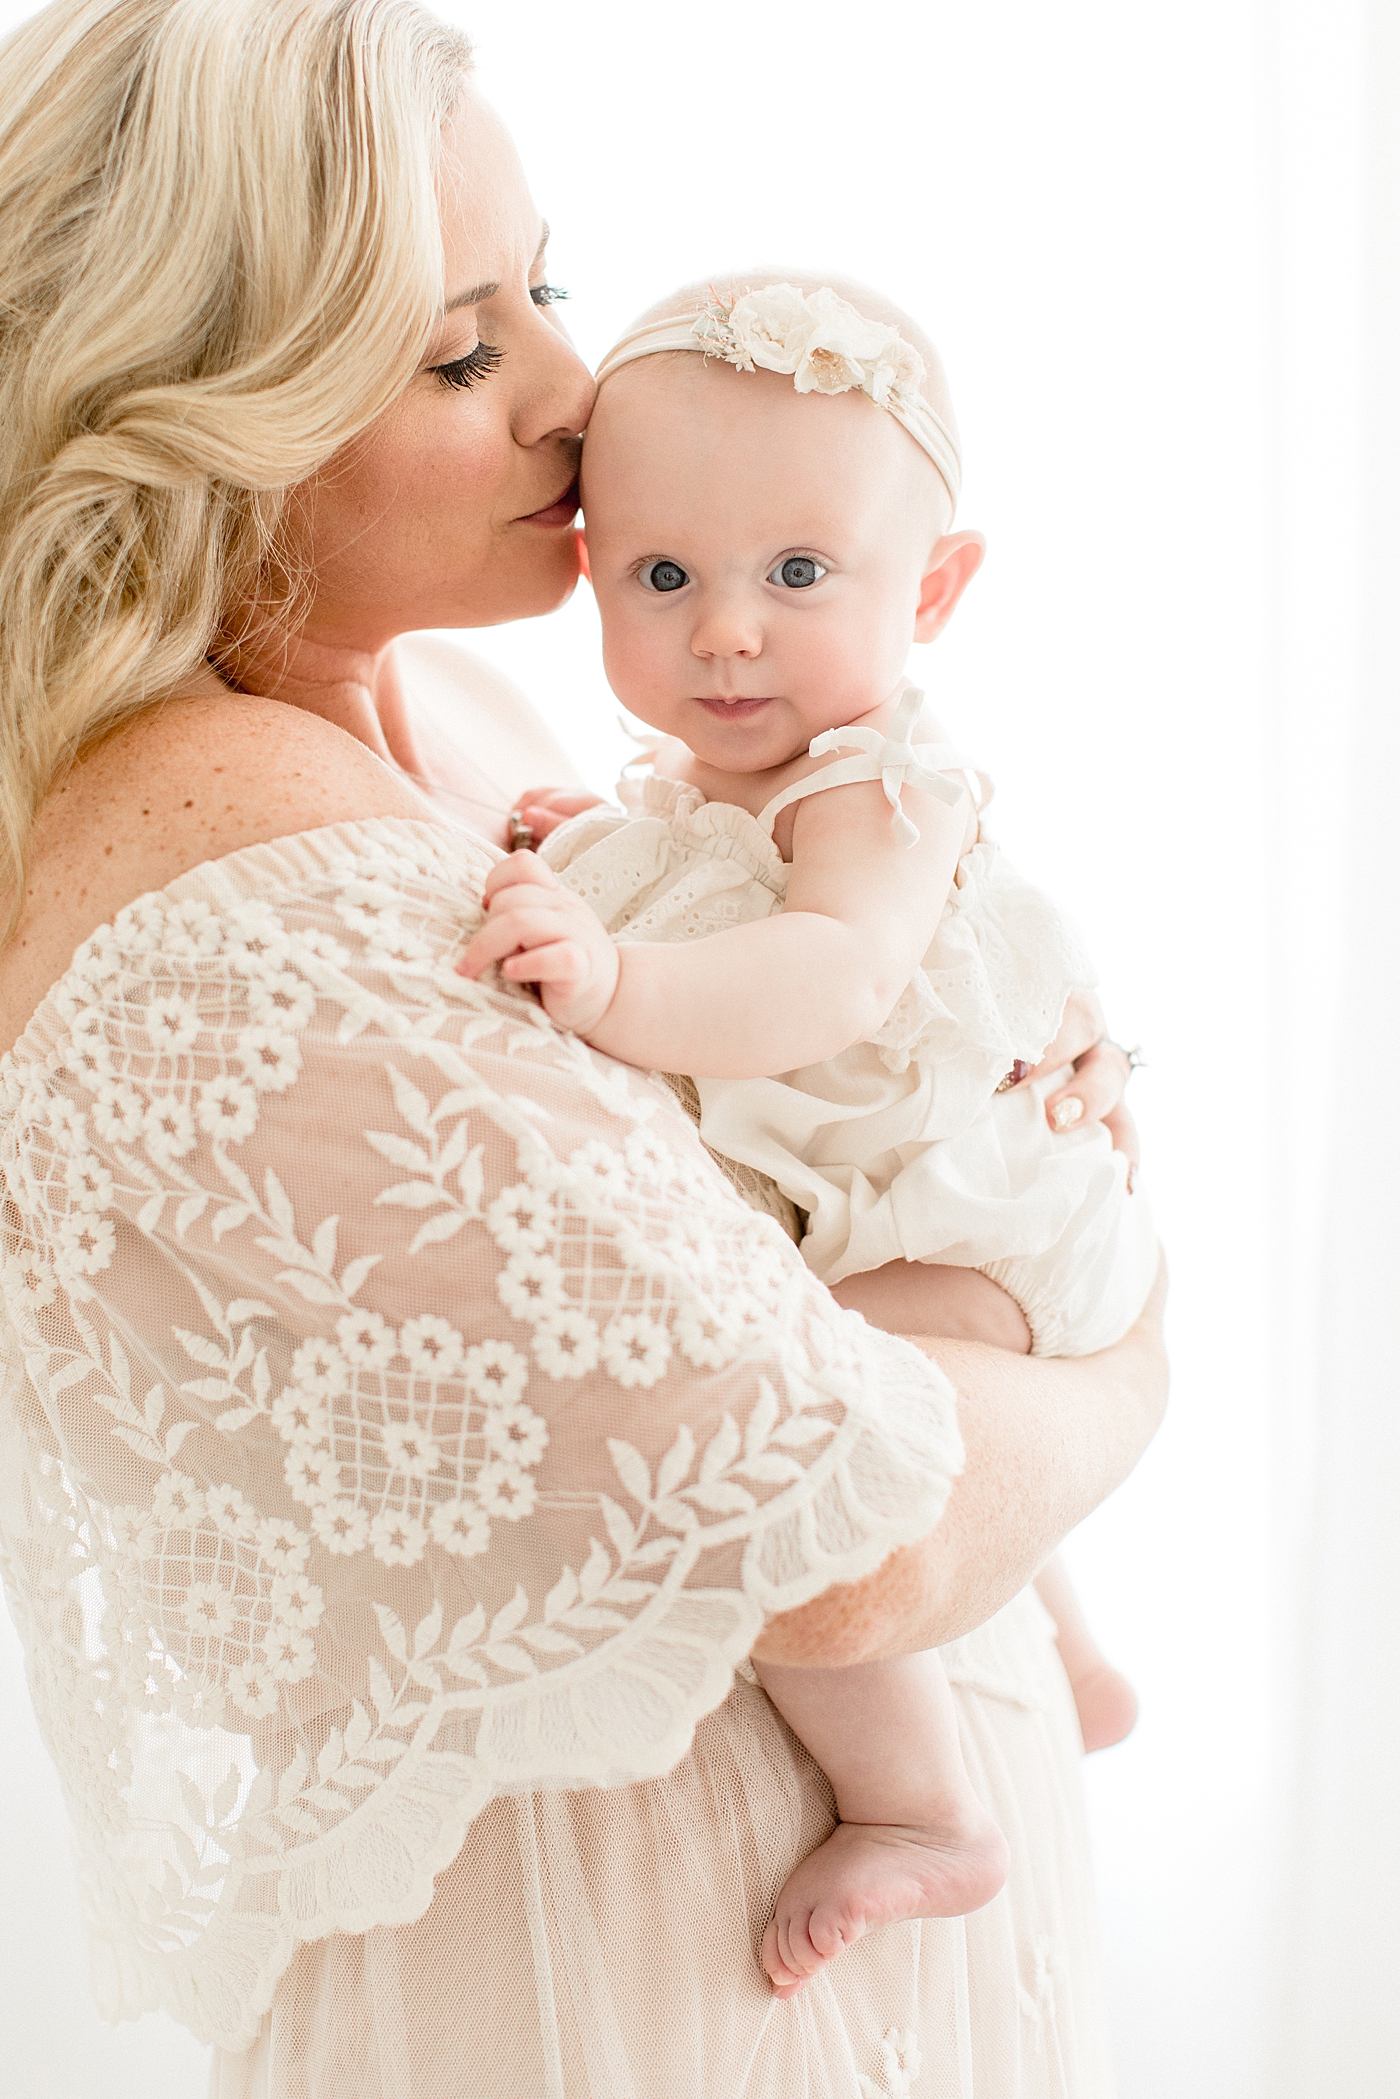 Mom giving her baby girl a kiss. Photo by Brittany Elise Photography.